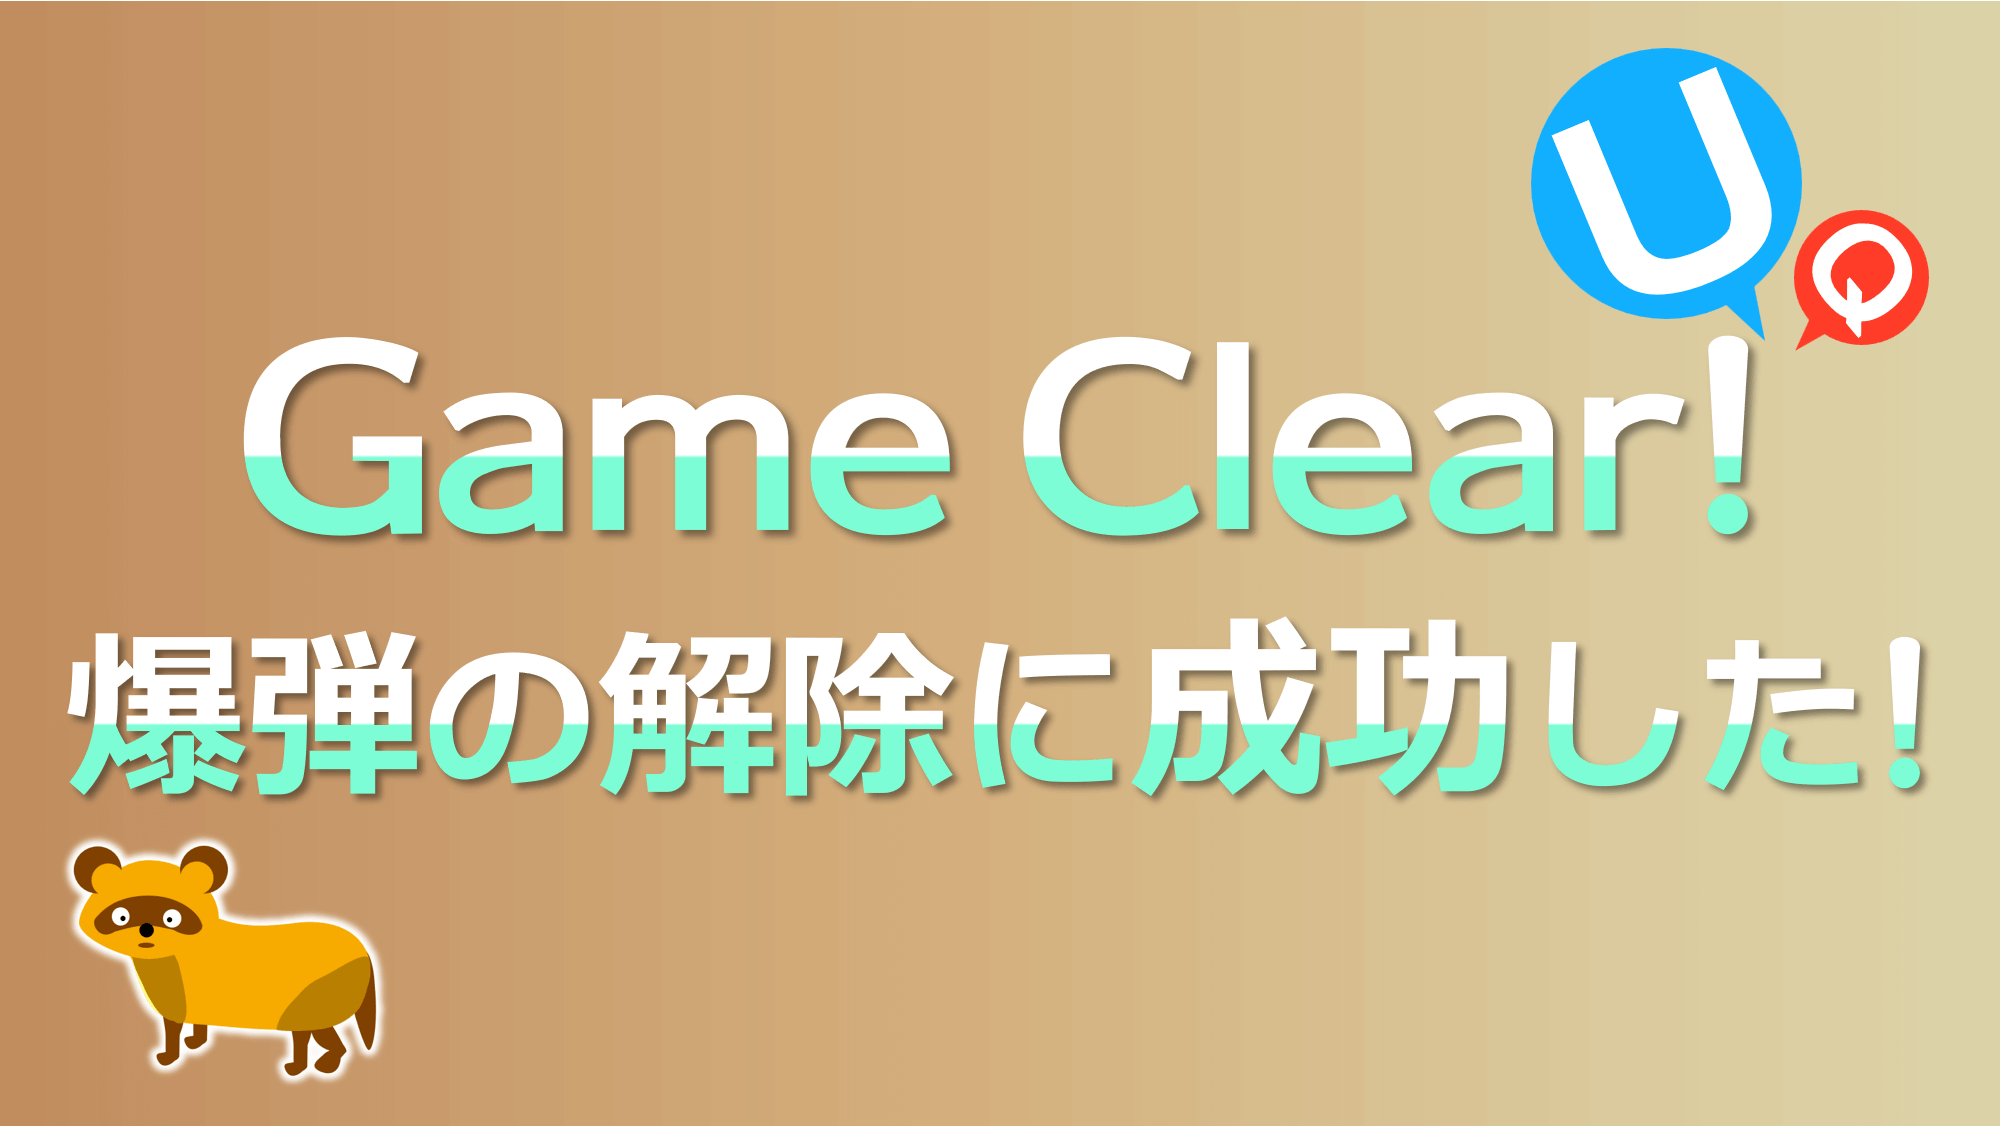 Game Clear!